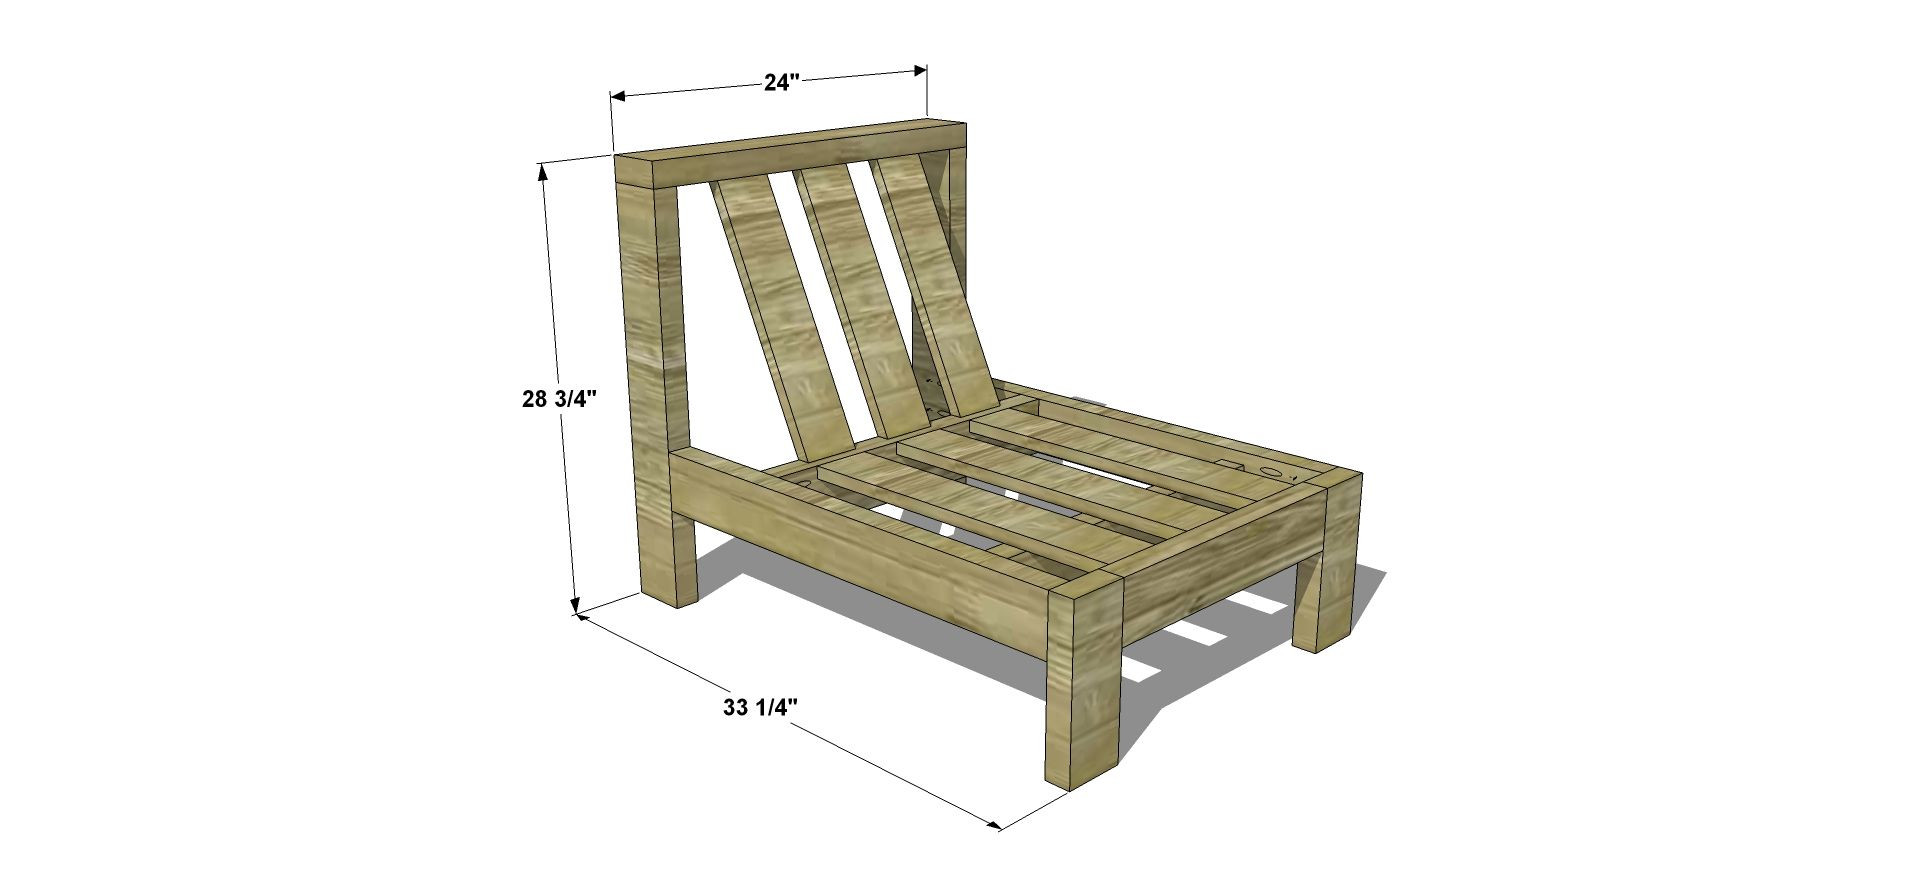 DIY Outdoor Sectional Plans
 Free DIY Furniture Plans How to Build an Armless Chair